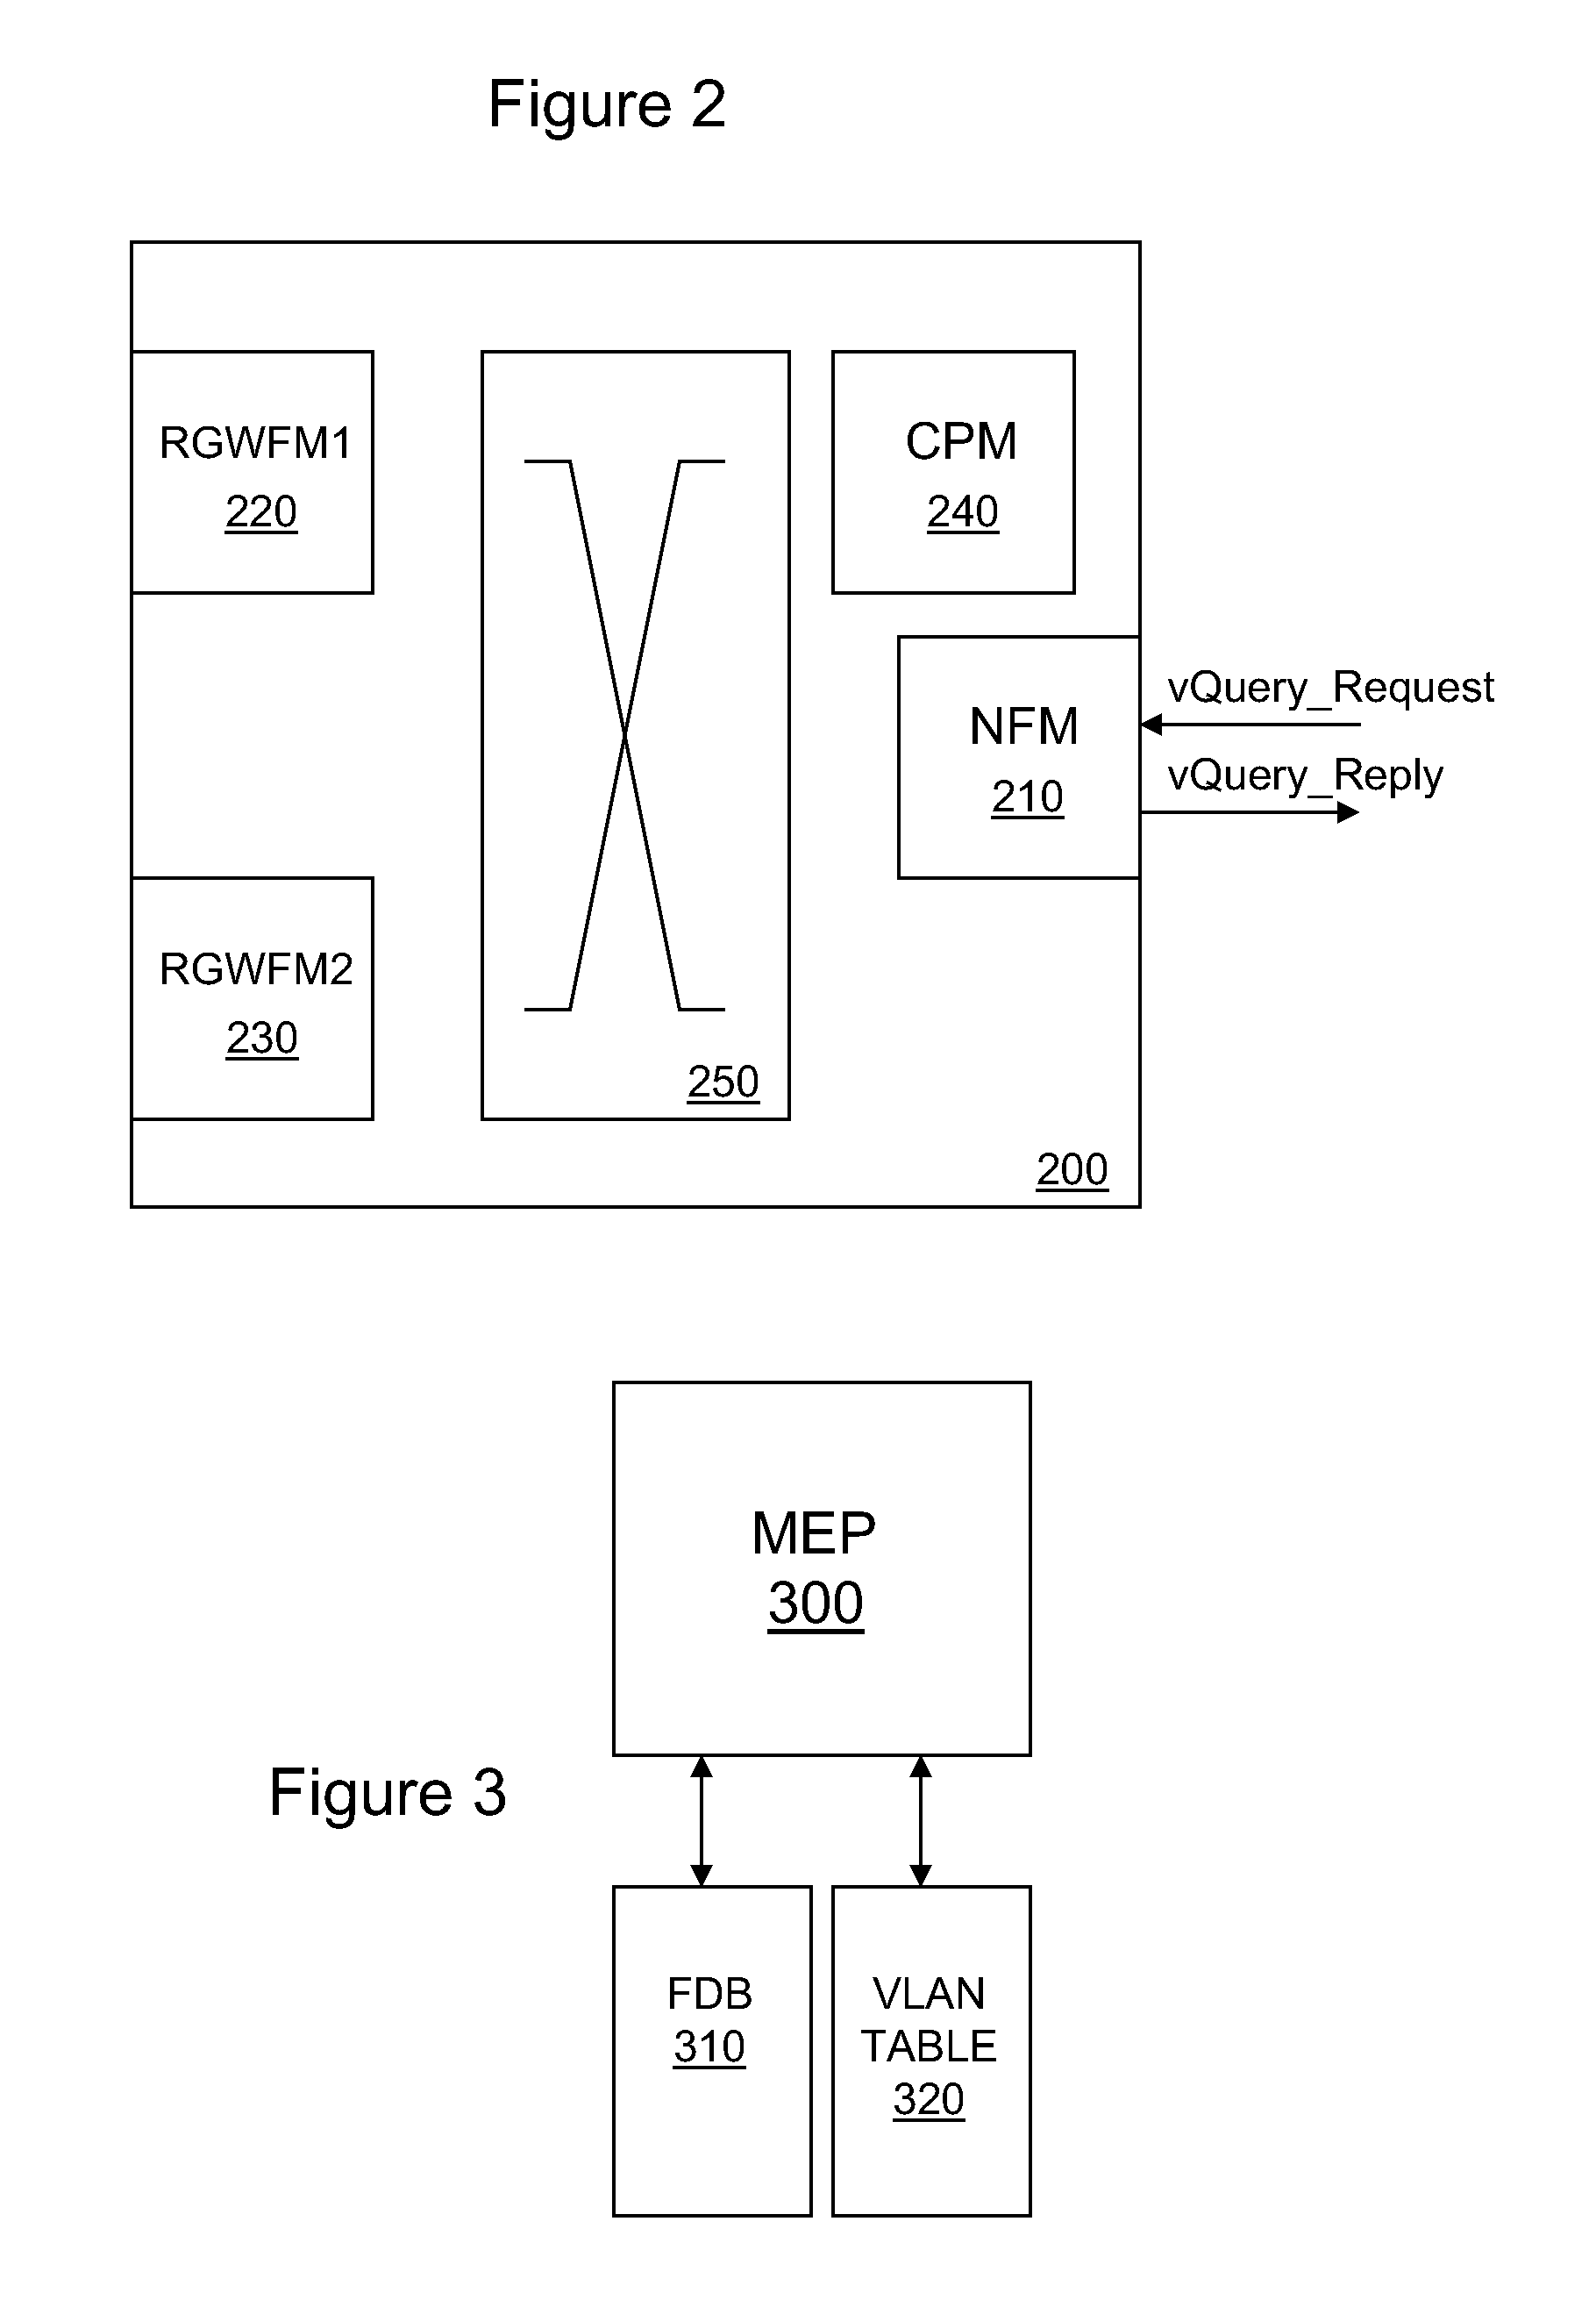 Logical Group Endpoint Discovery for Data Communication Network